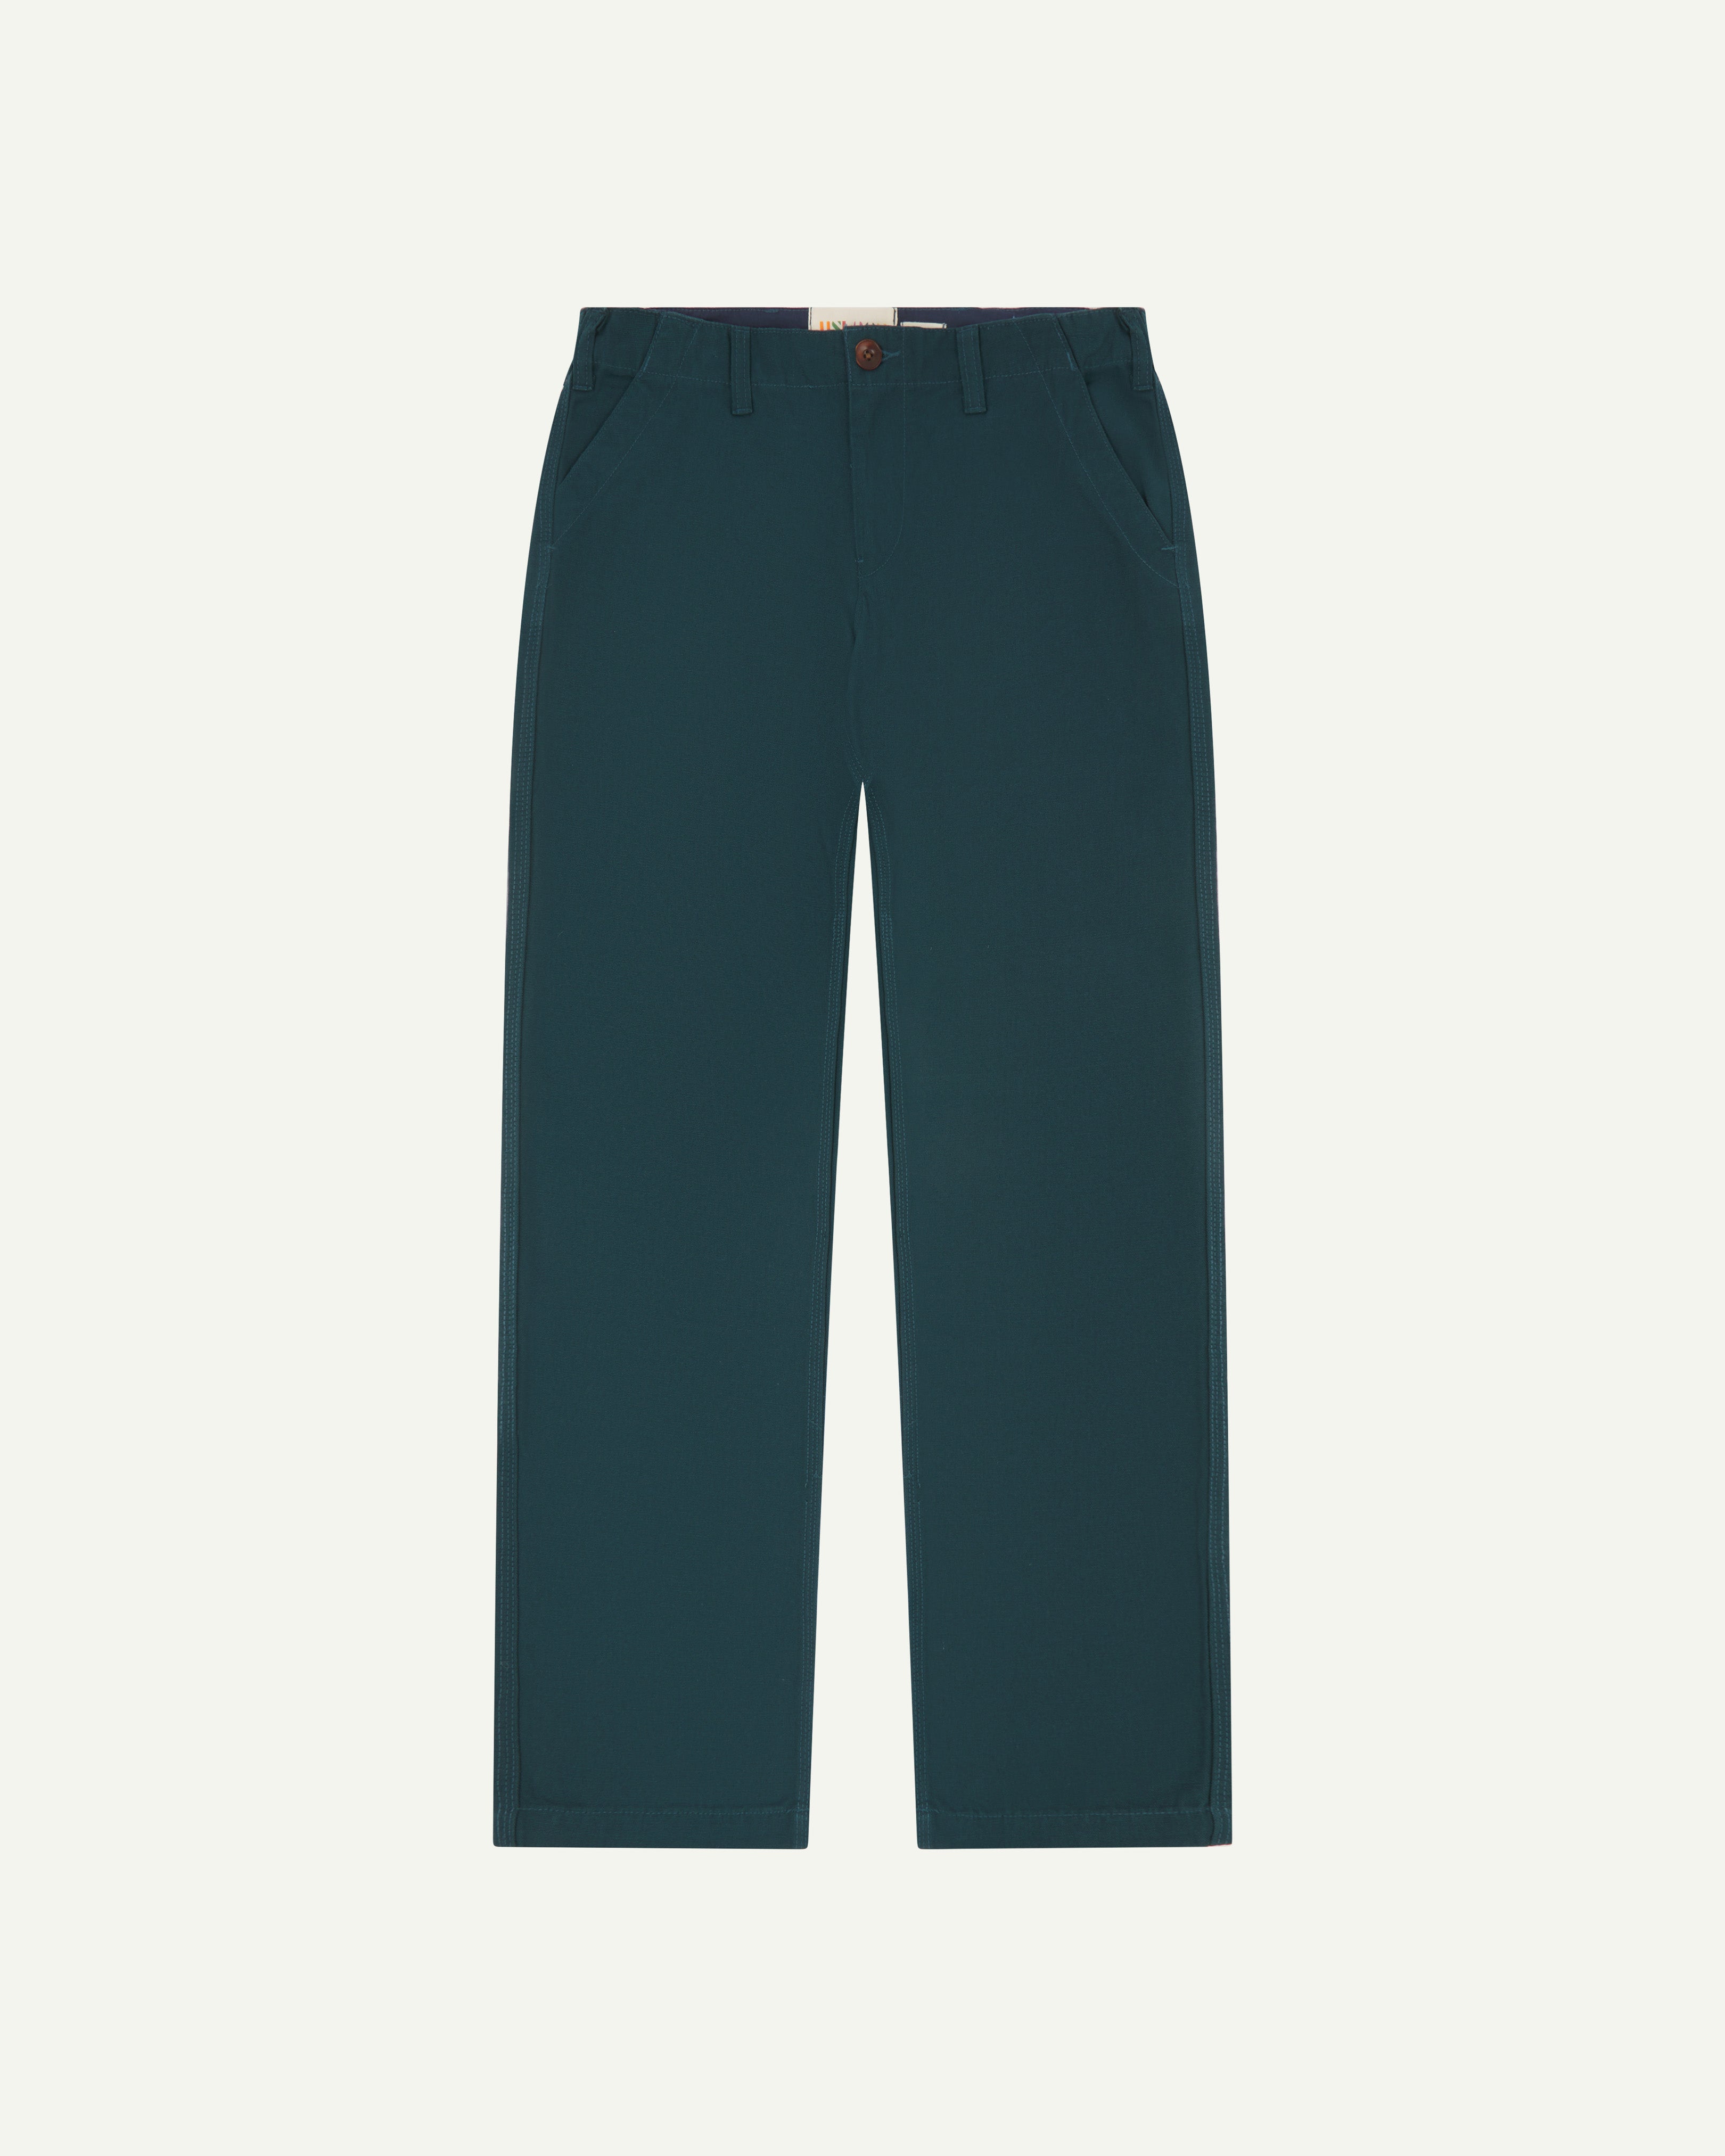 Flat view of #5005 Uskees men's organic cotton 'peacock' coloured trousers on white background.